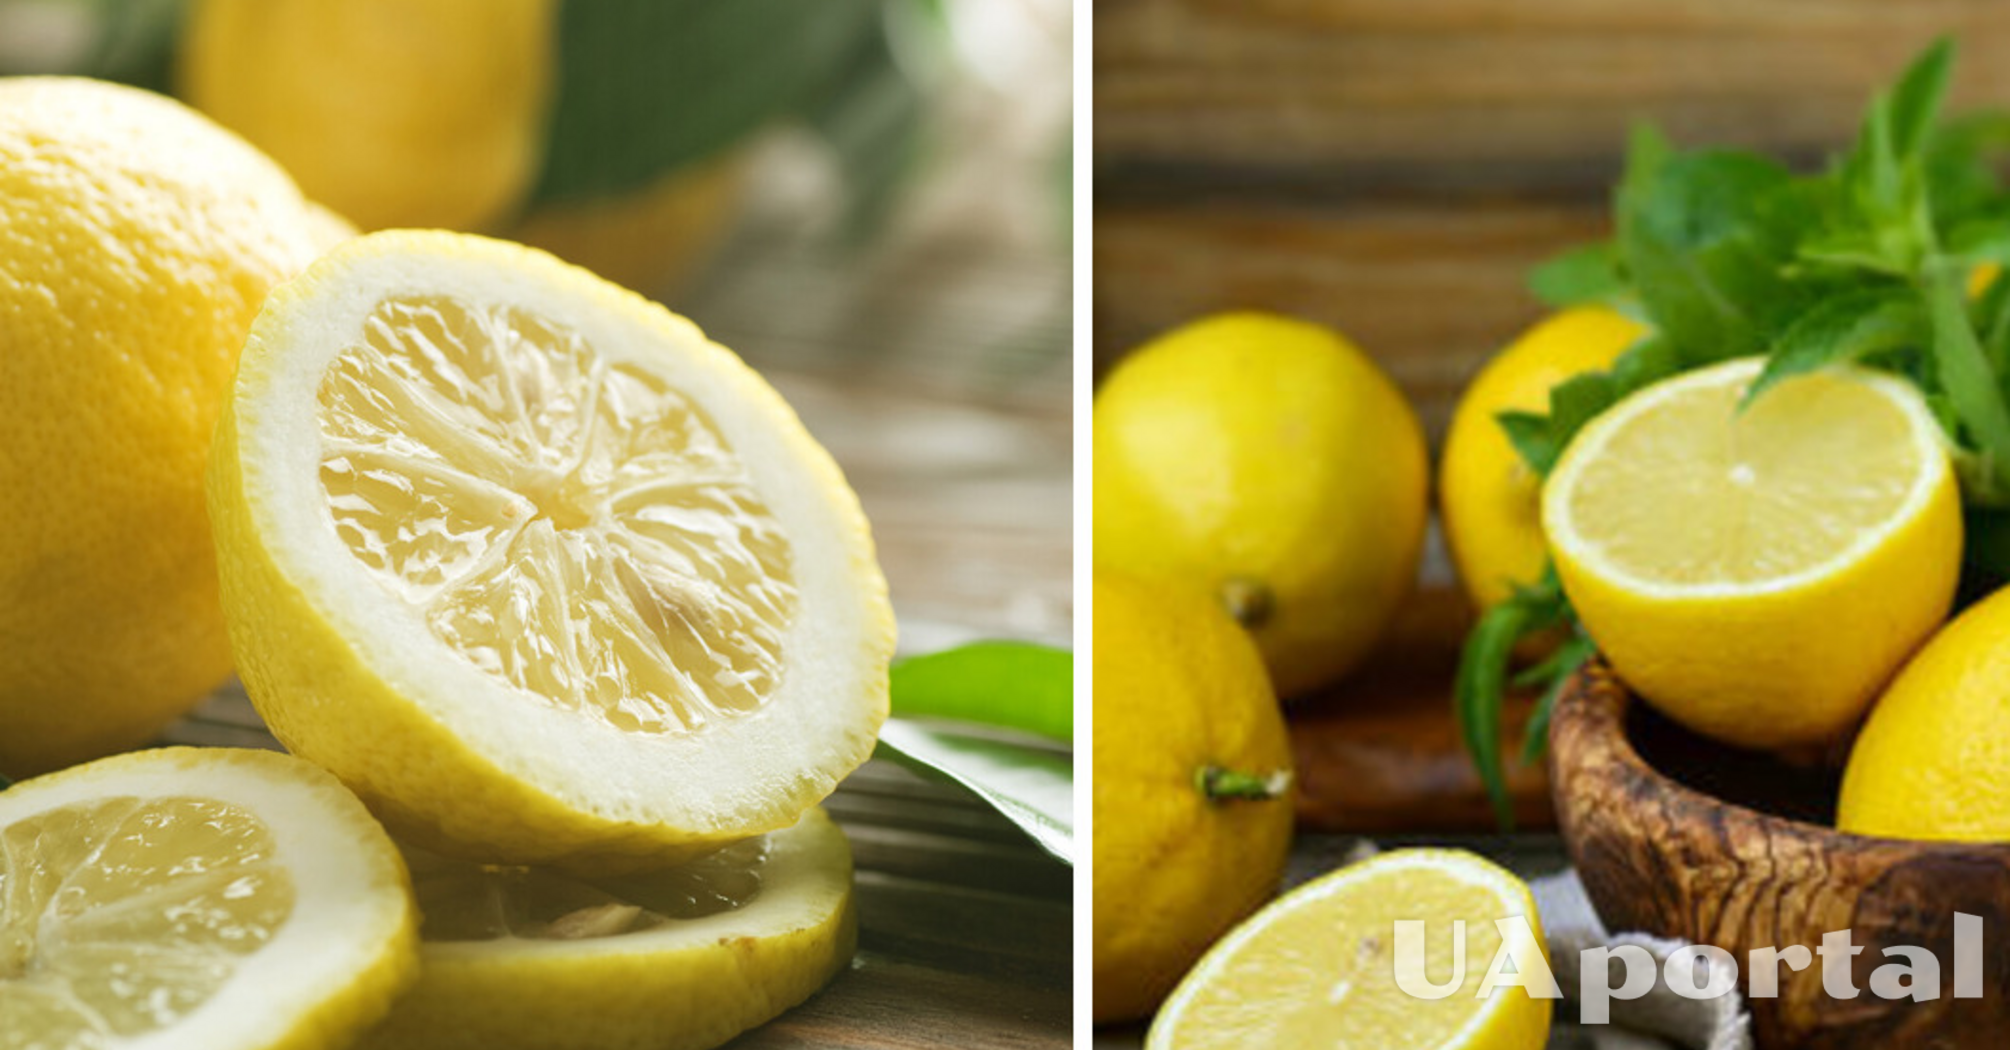 How to extend the shelf life of lemons: an effective life hack